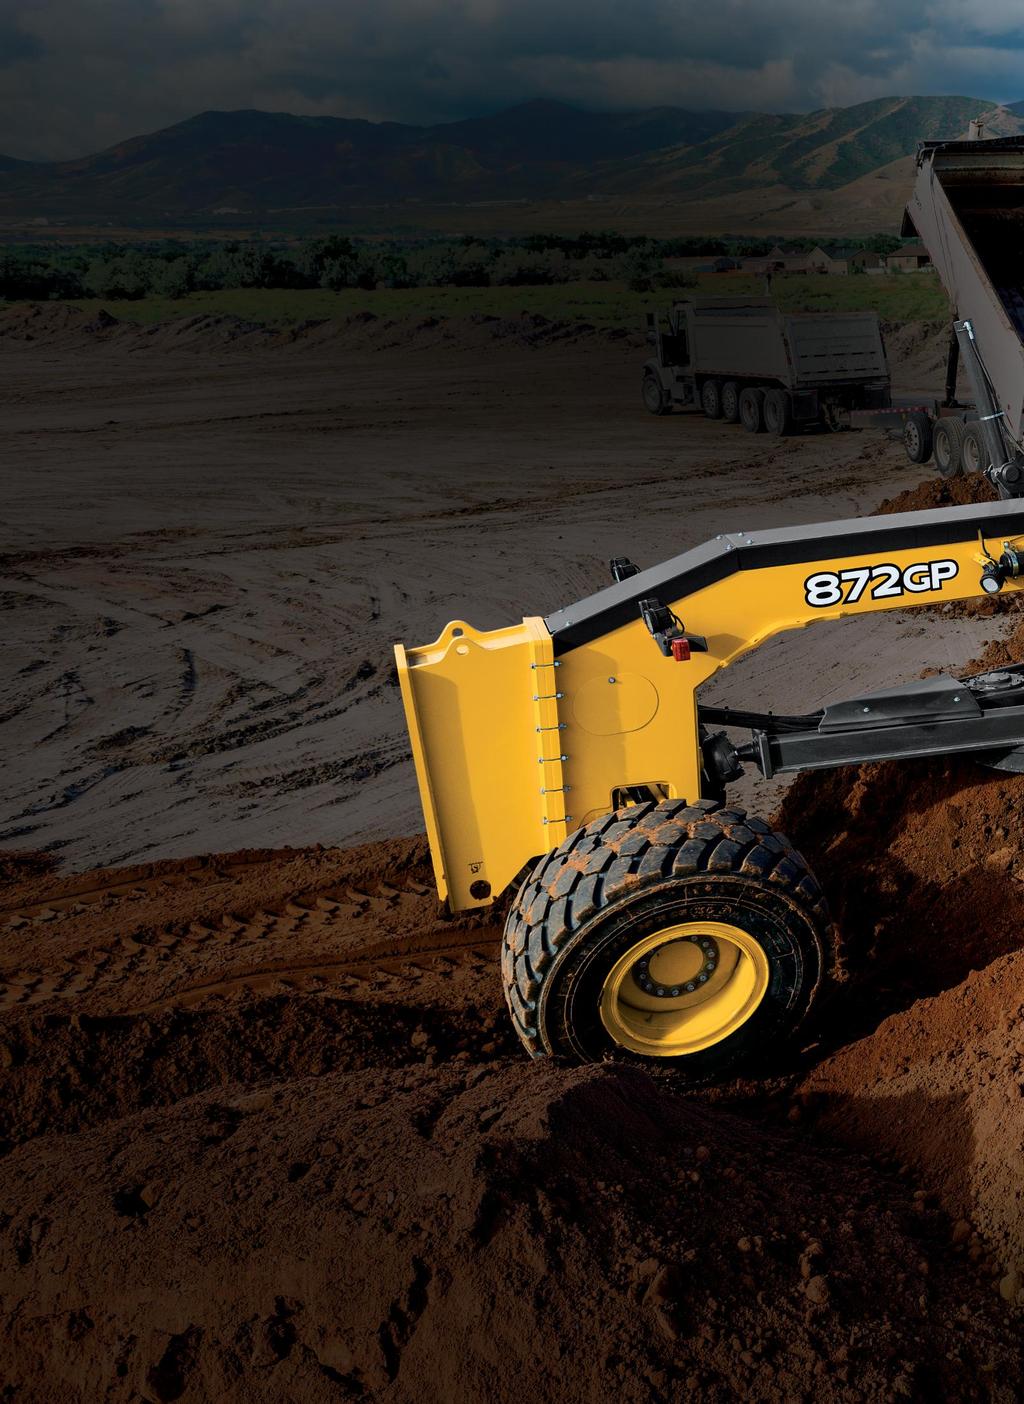 So many options, one obvious choice. Offering one-of-a-kind advantages and unequalled options, our G-Series Graders let you decide how the work gets done.